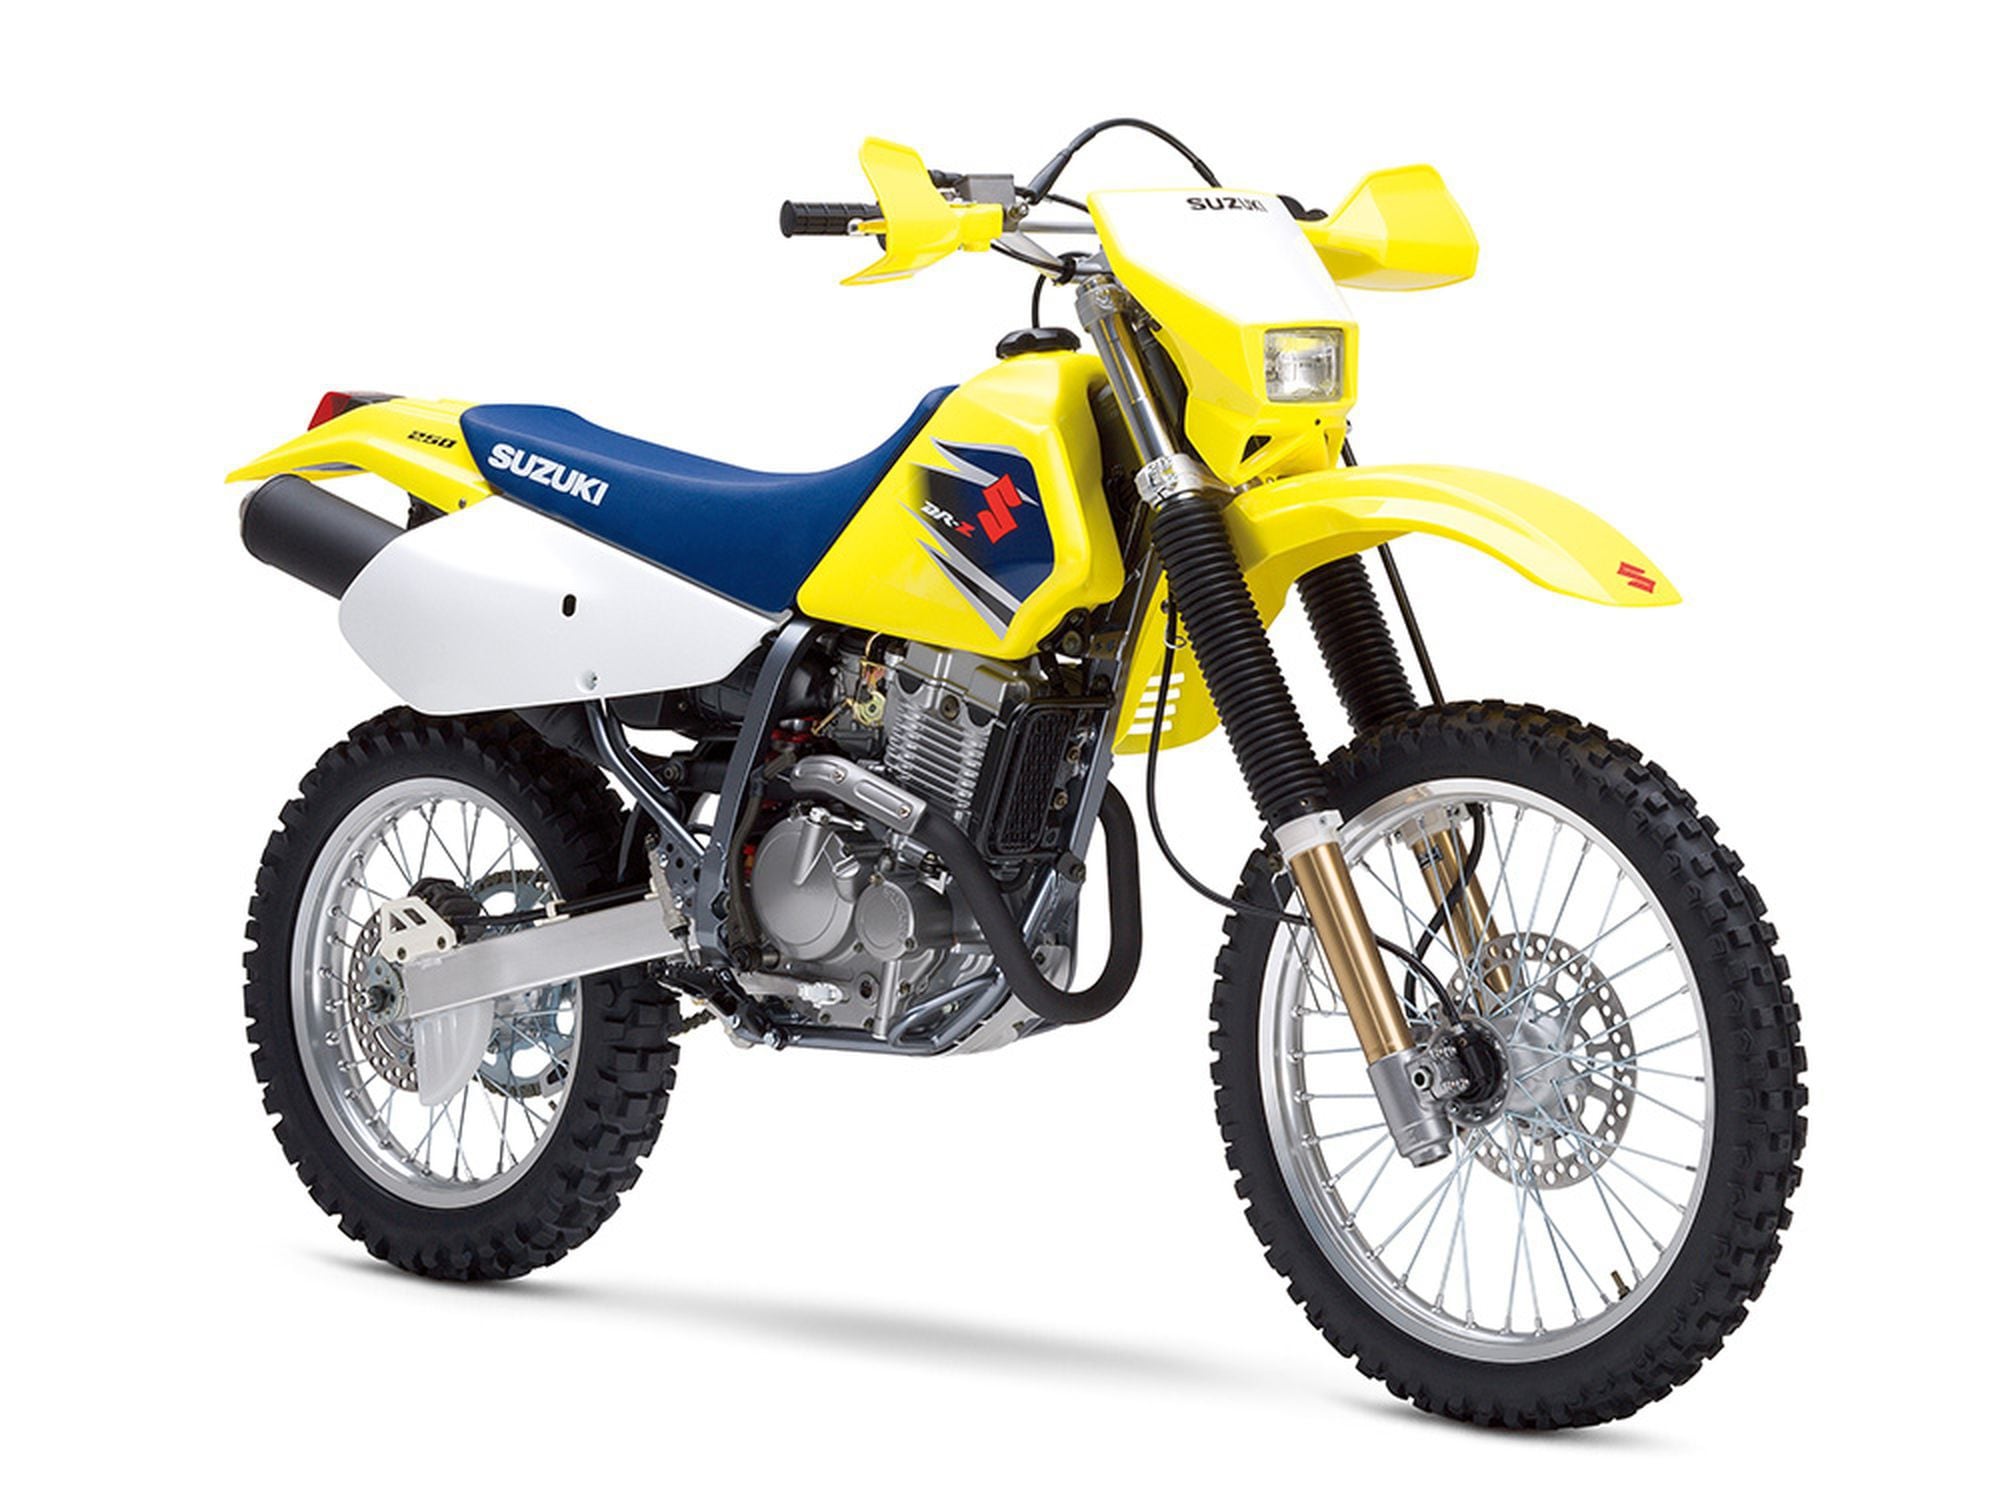 This is the quintessential small-displacement dual-sport of its time. It is light, cheap, and gets great mpg for a bike built before the 2000s. These are available all day long for under $2,000.